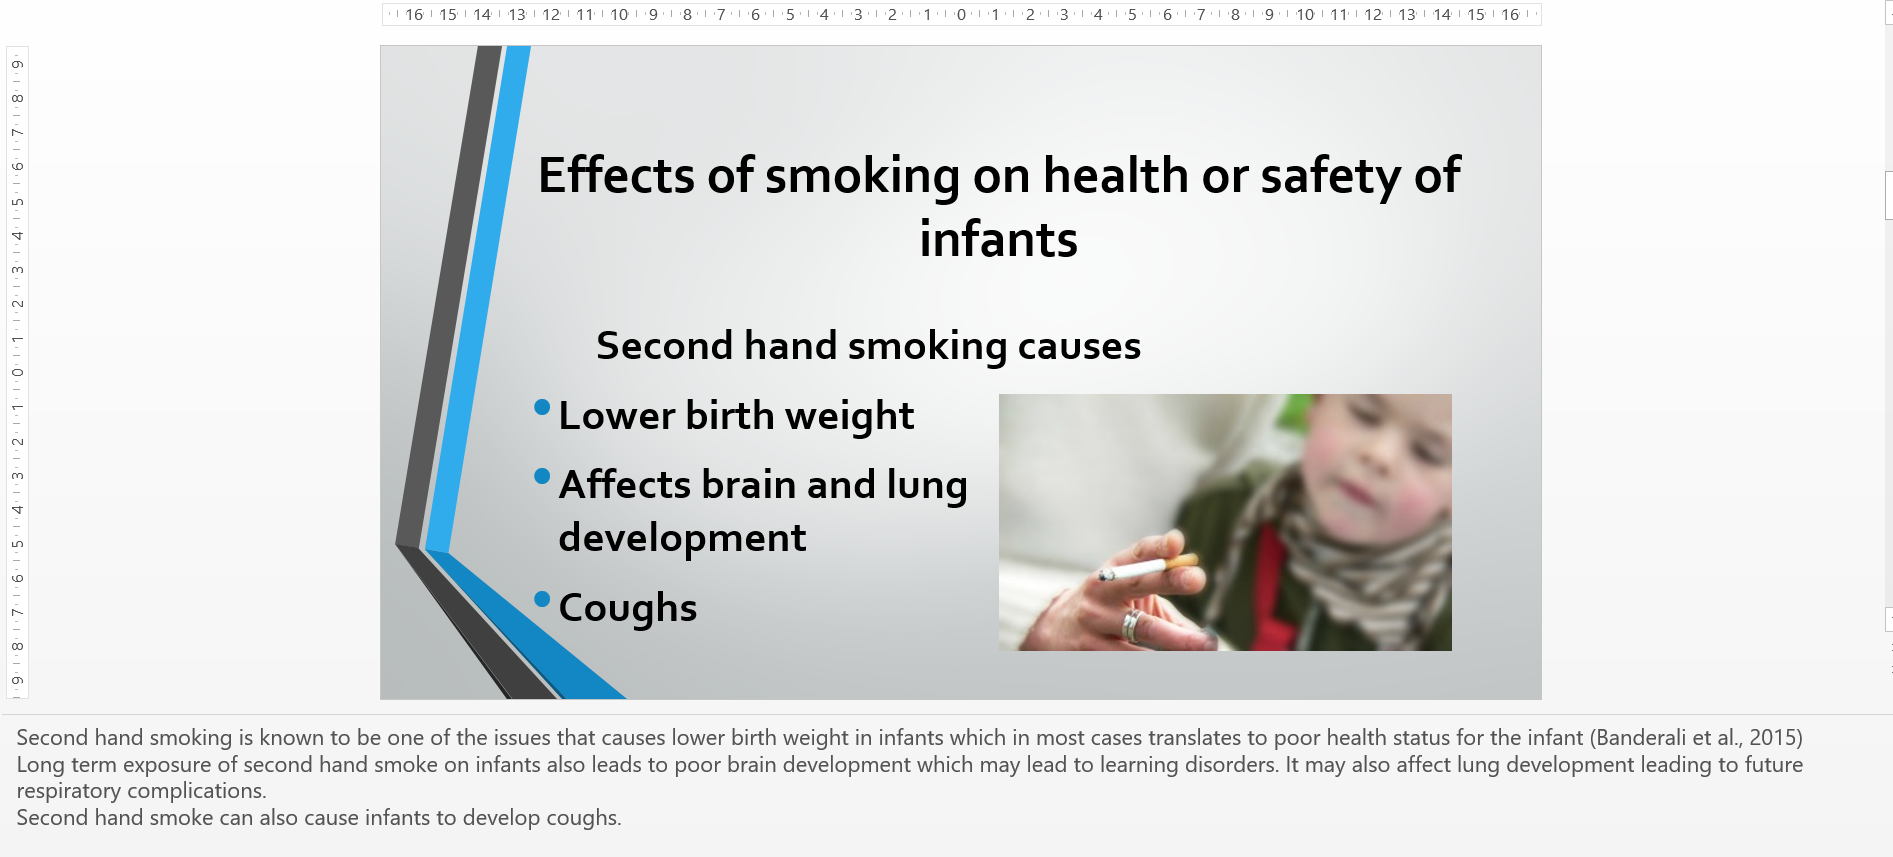 Describe the selected environmental factor. Explain how the environmental factor you selected can potentially affect the health or safety of infants.